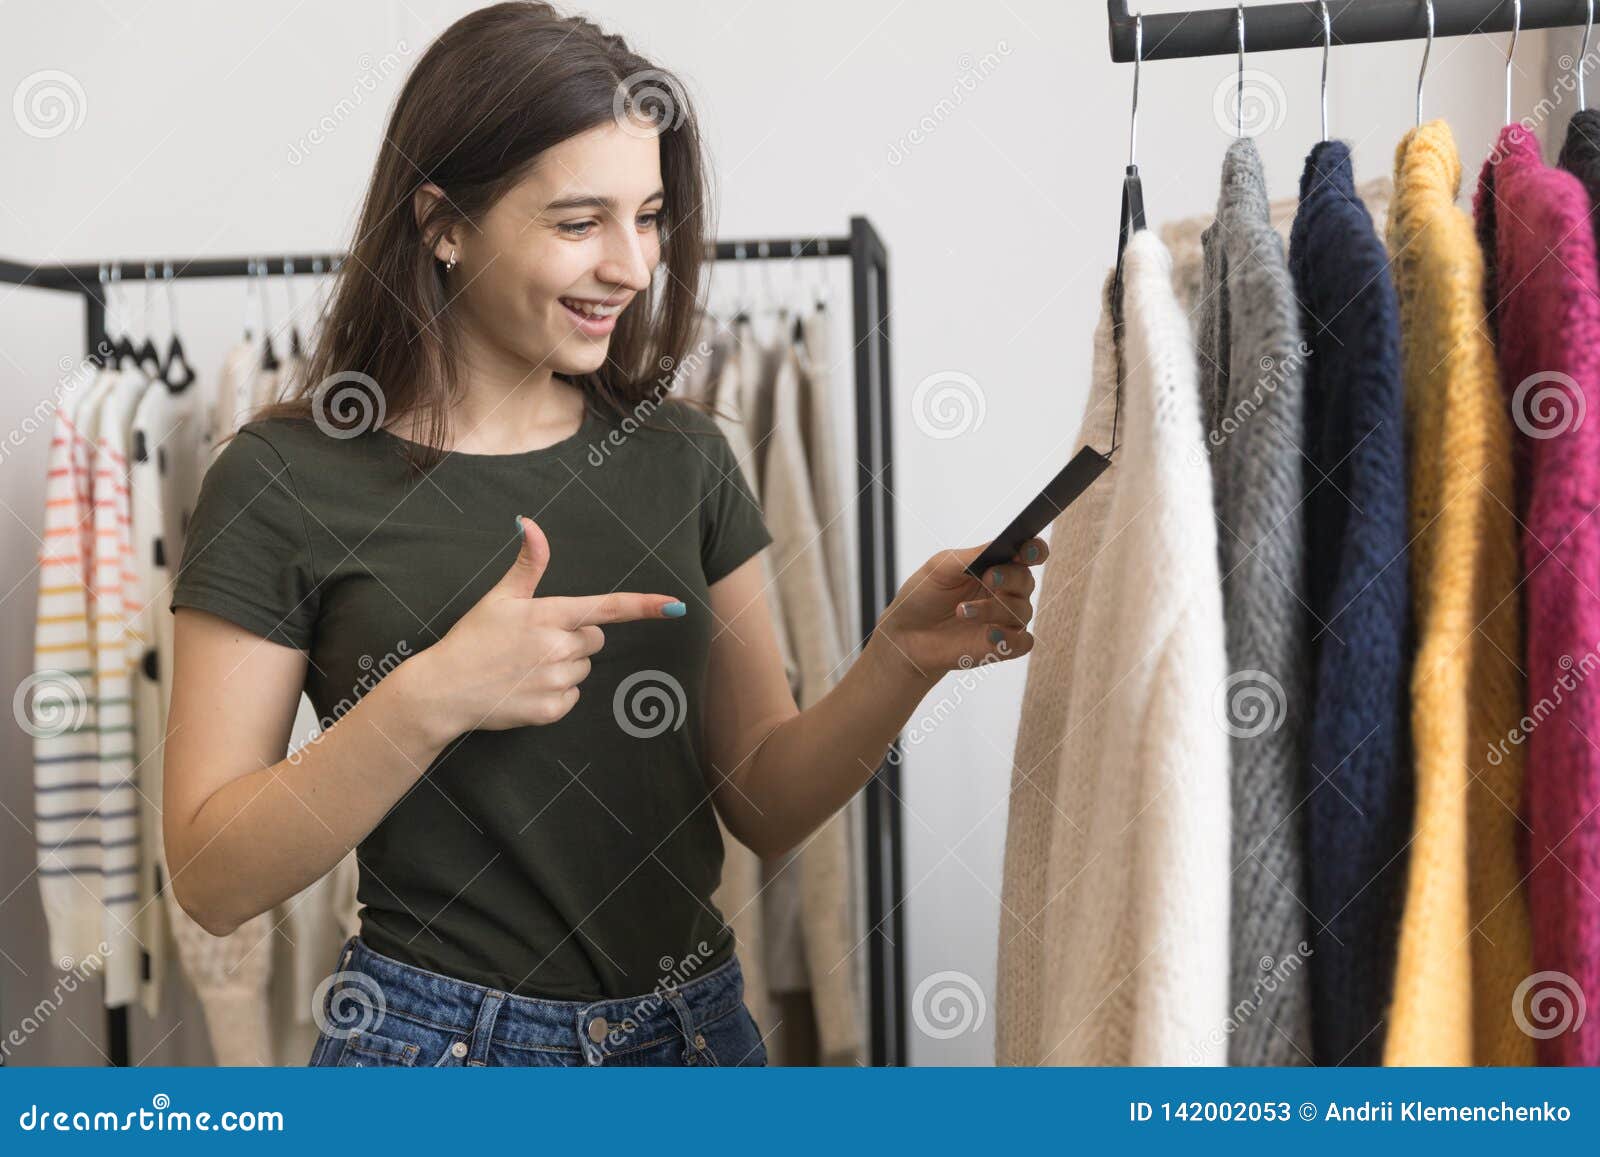 A Young Girl in a Clothing Store, Chooses a Sweater. Stock Image ...